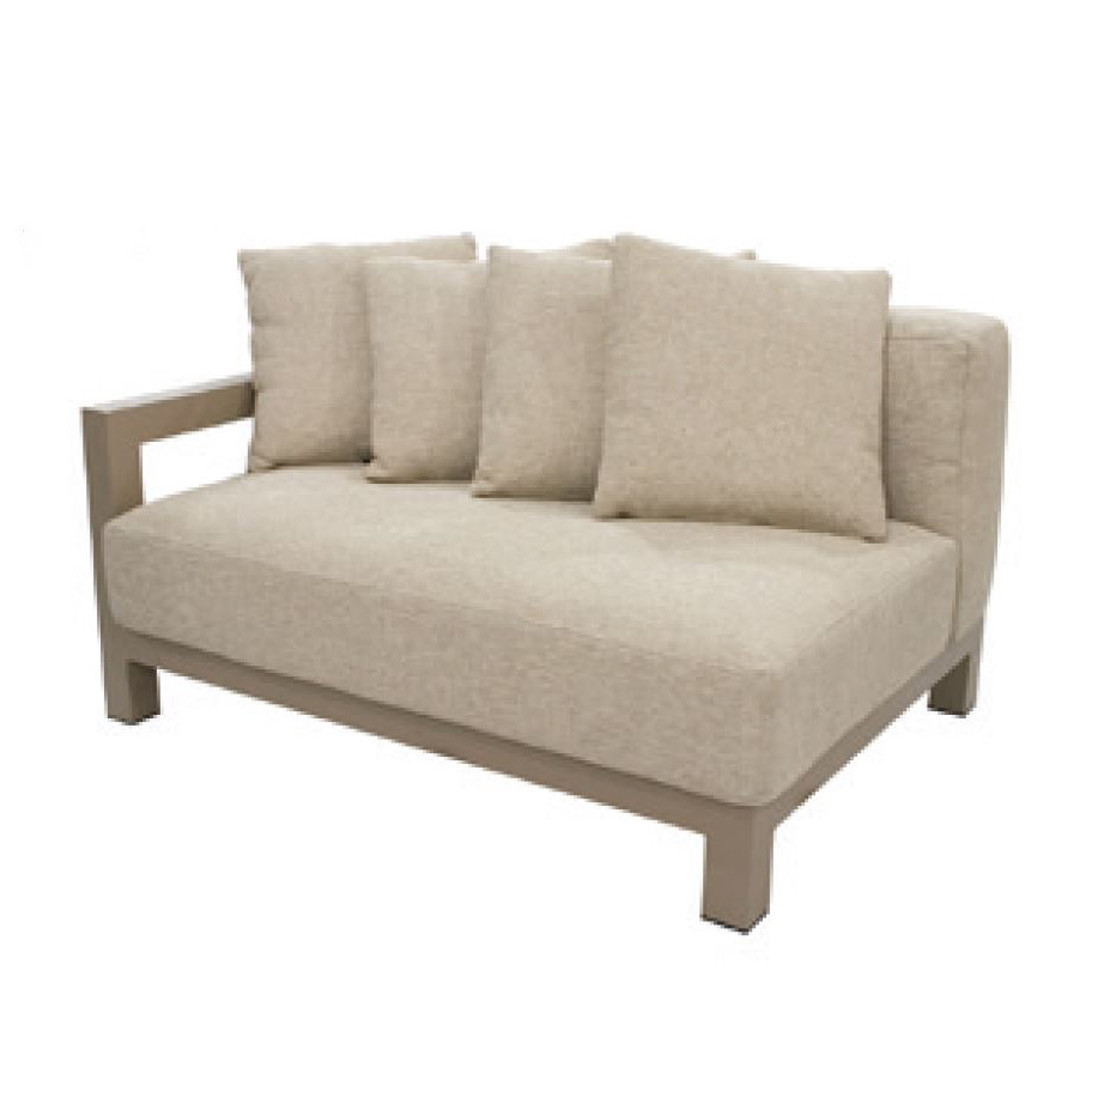 Raffinato living bench 1.5 seater right latte with 6 cushions